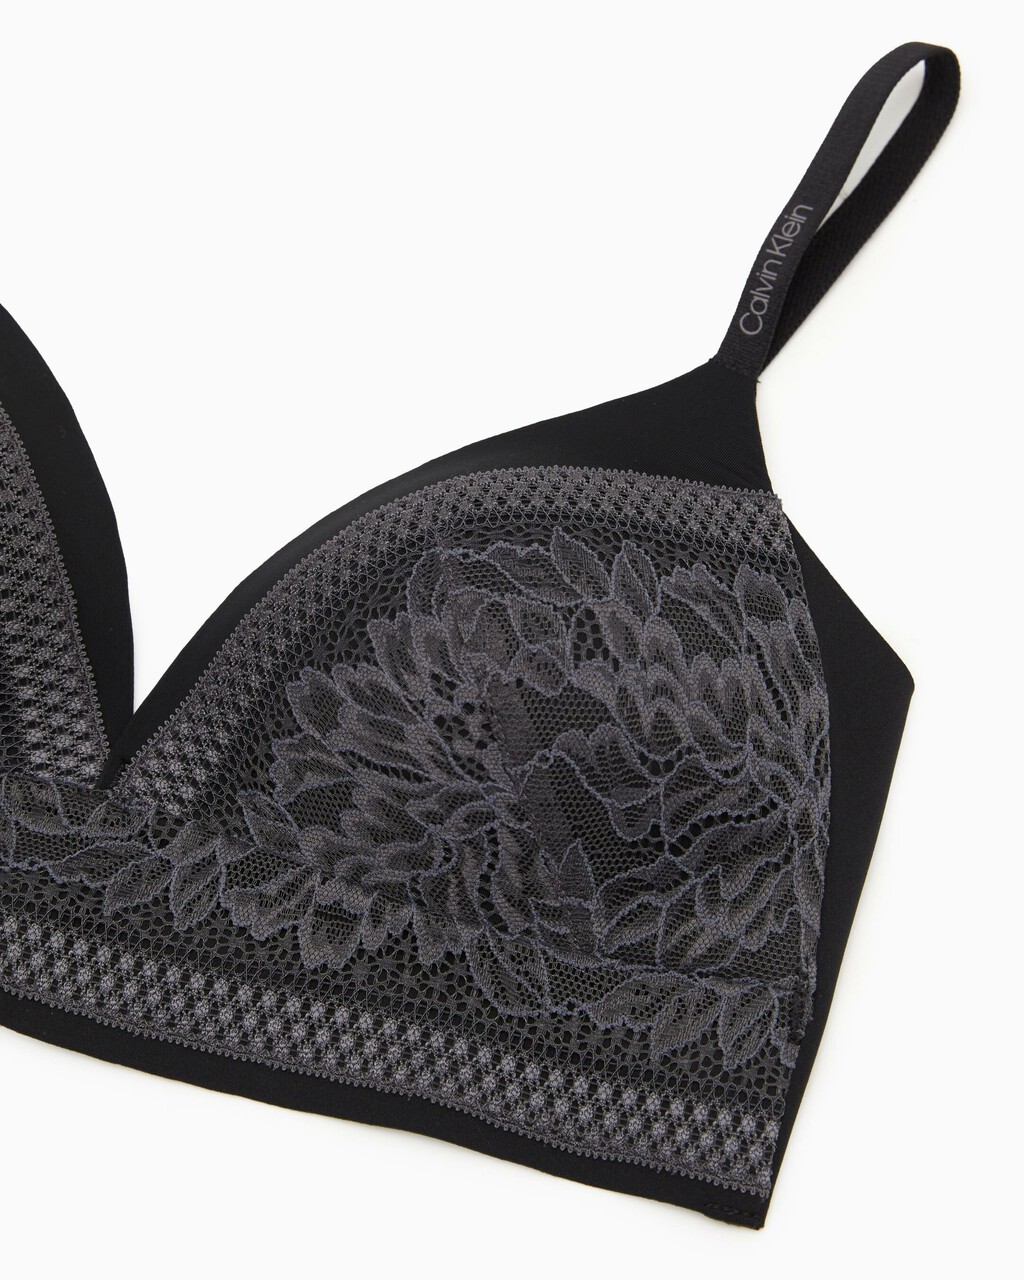 CK Black Linear Lace Lightly Lined Triangle Bra, Calvin Klein